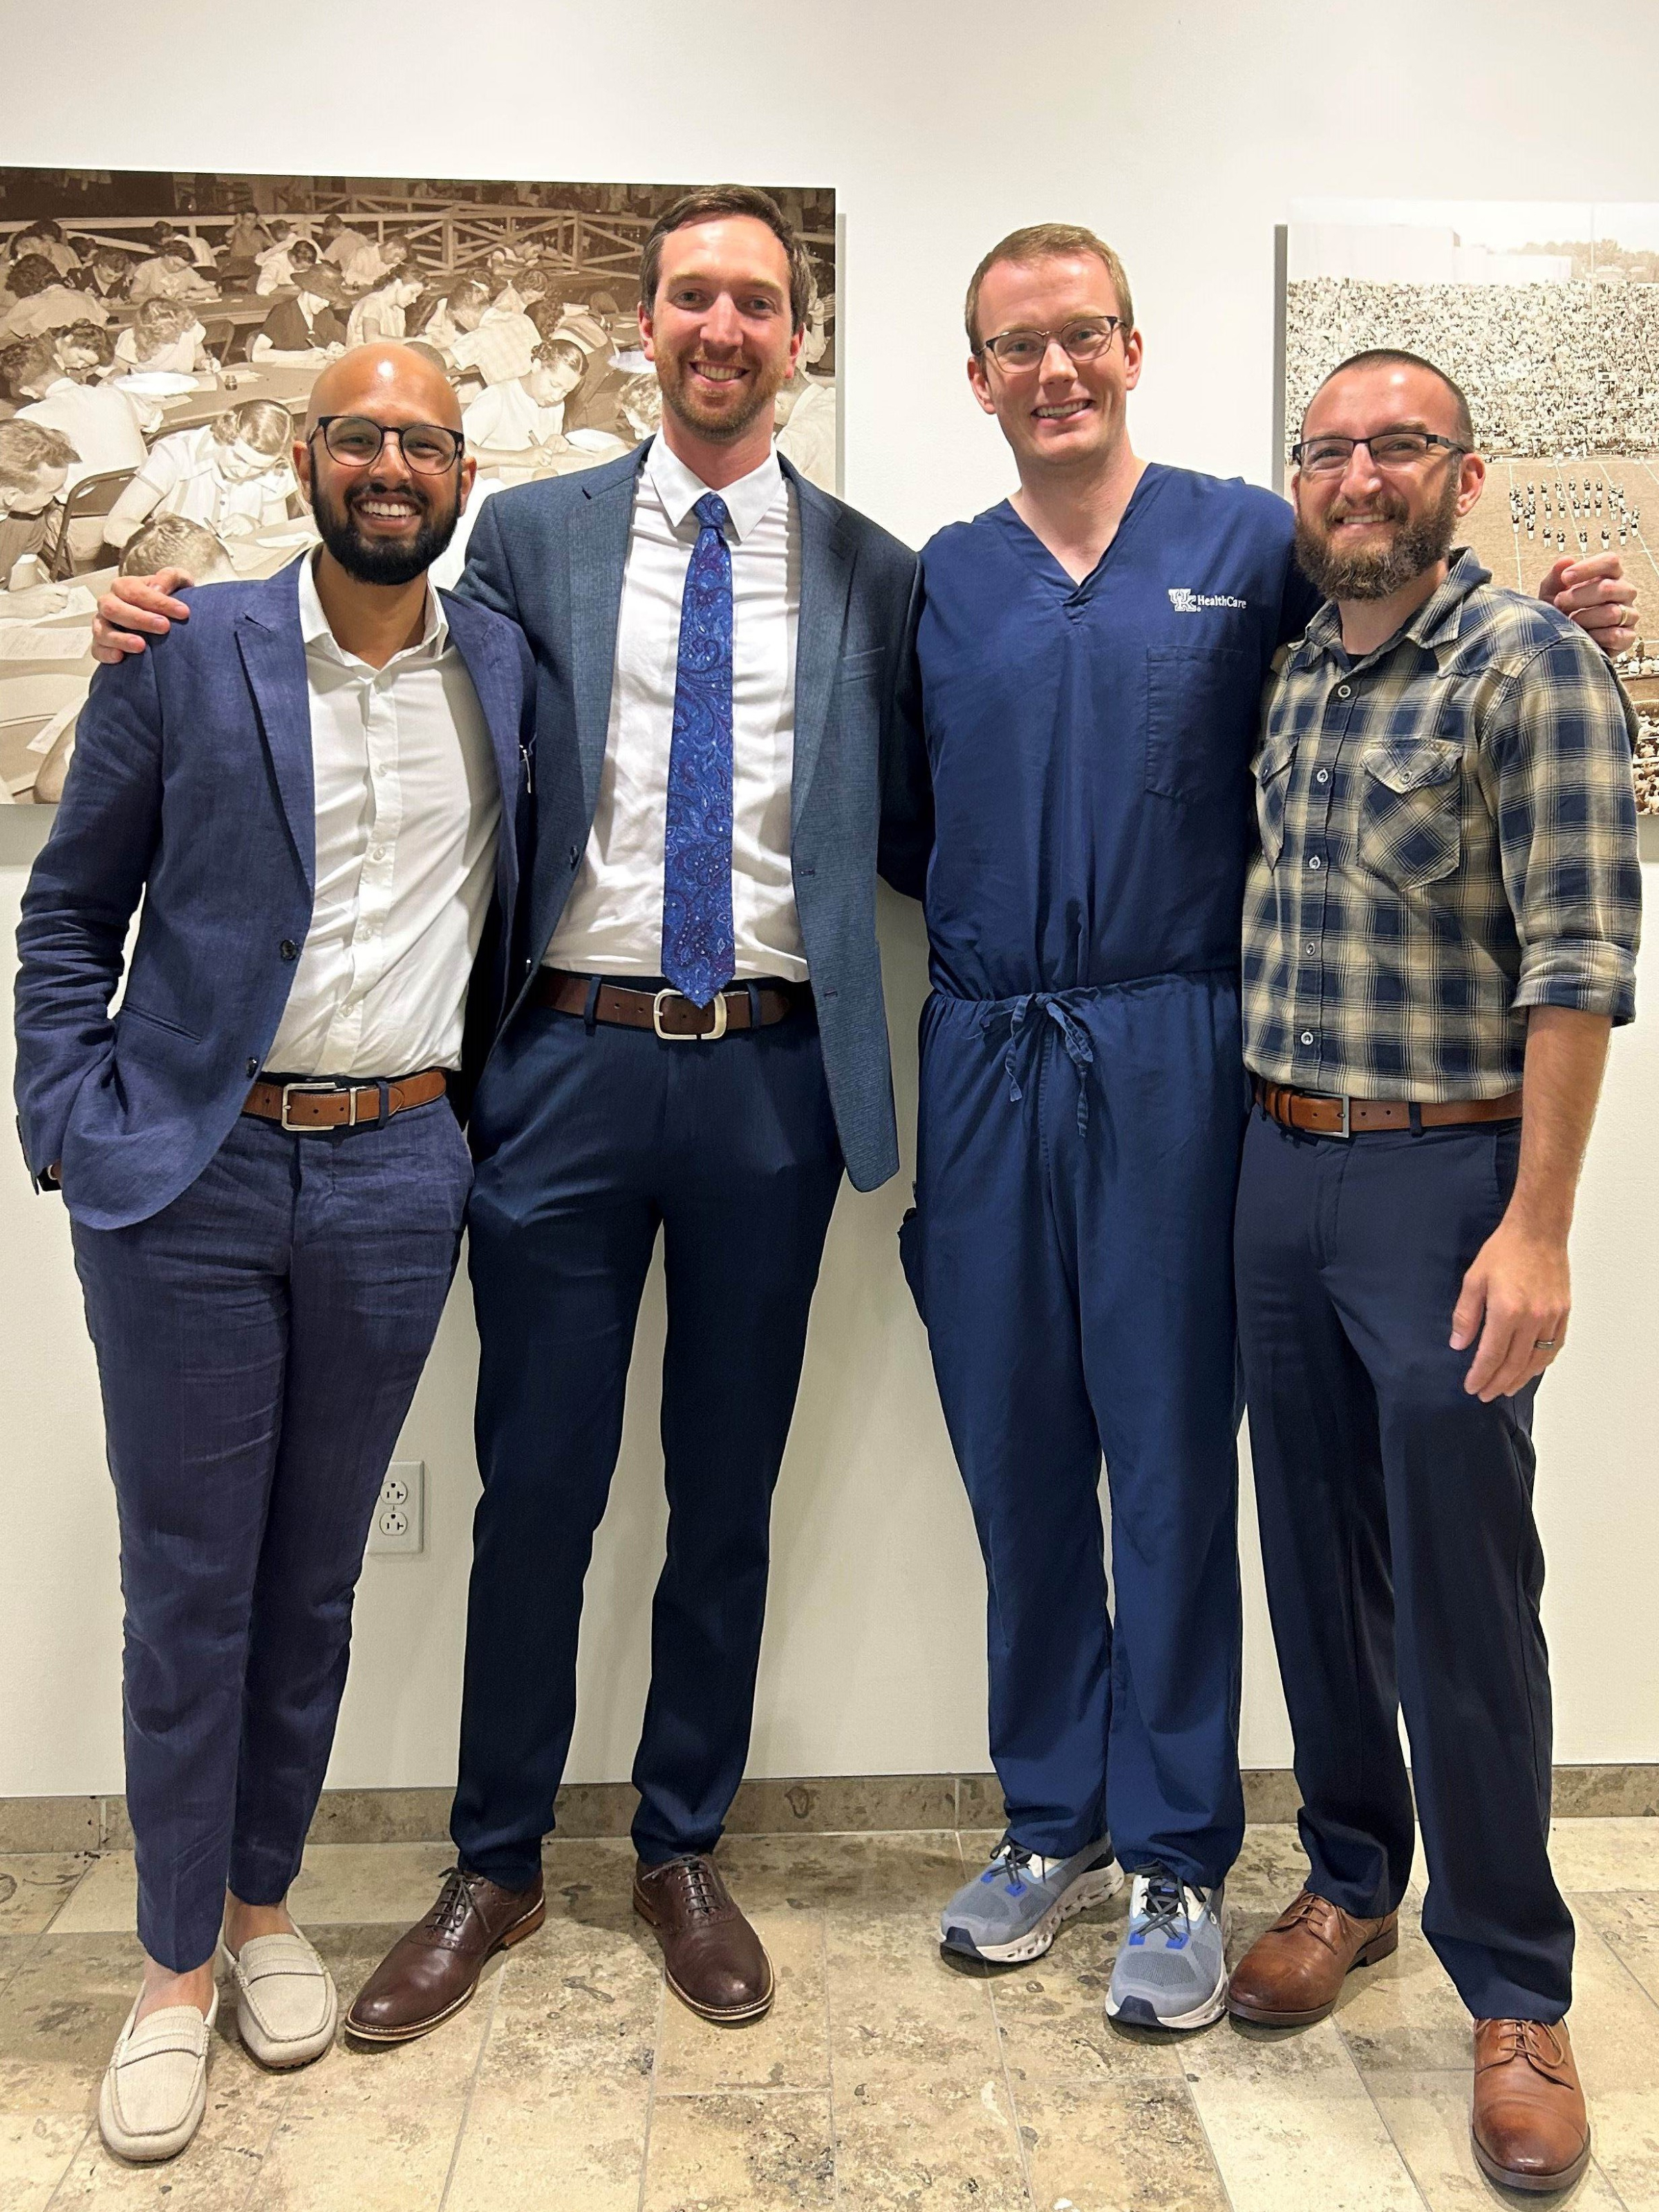 Four PGY 4 Residents